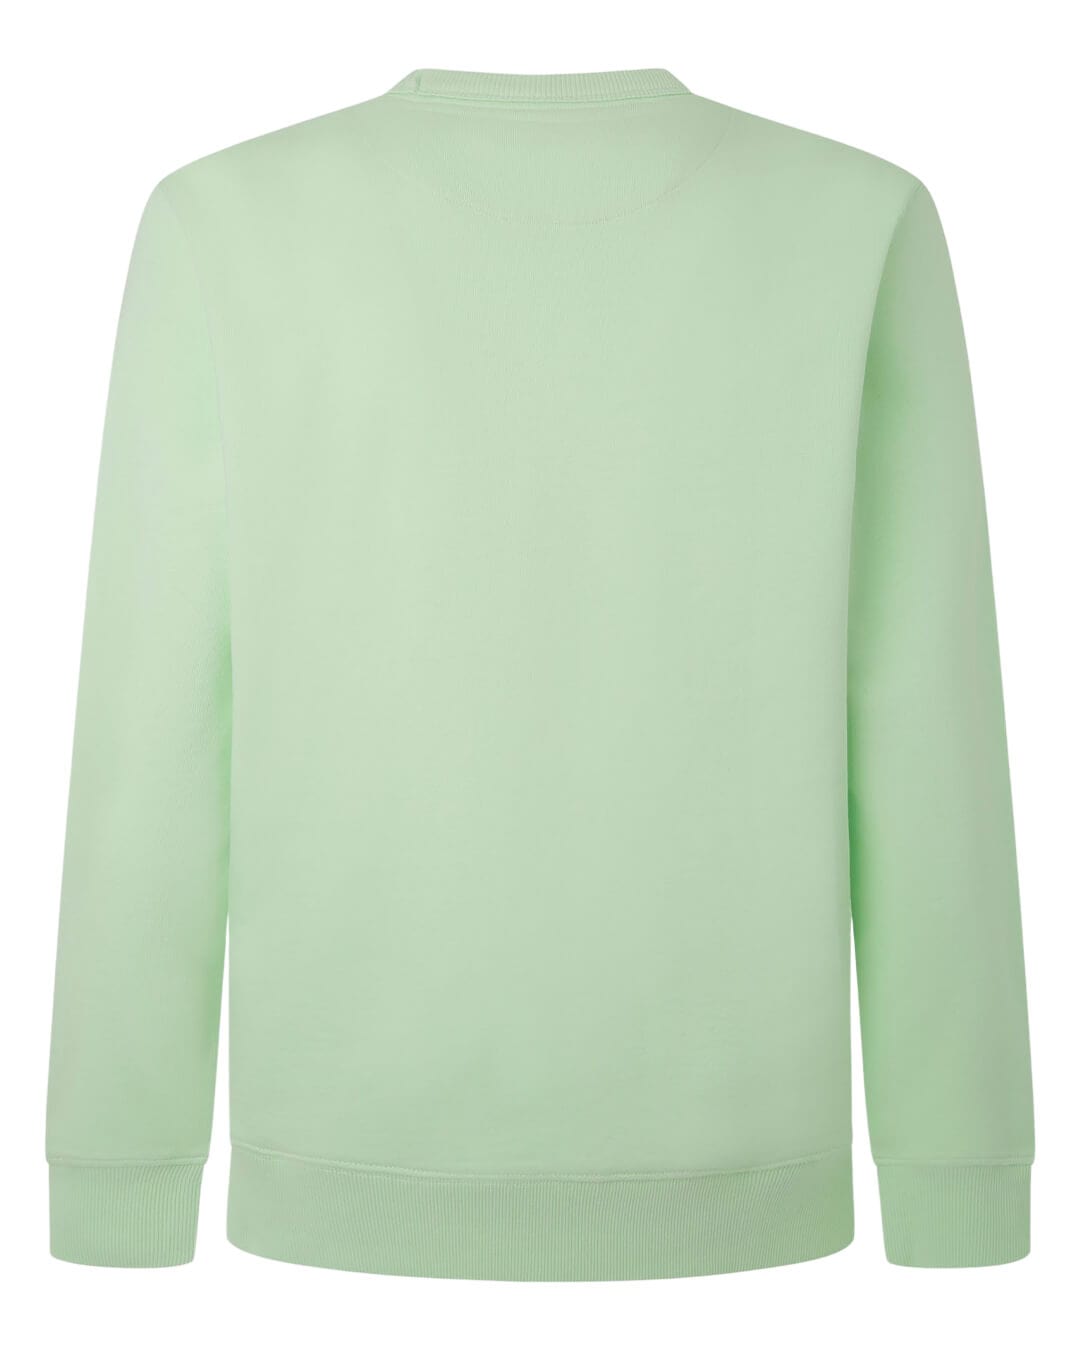 Pepe Jeans Jumpers Pepe Jeans Green Crewneck Sweatshirt With Logo